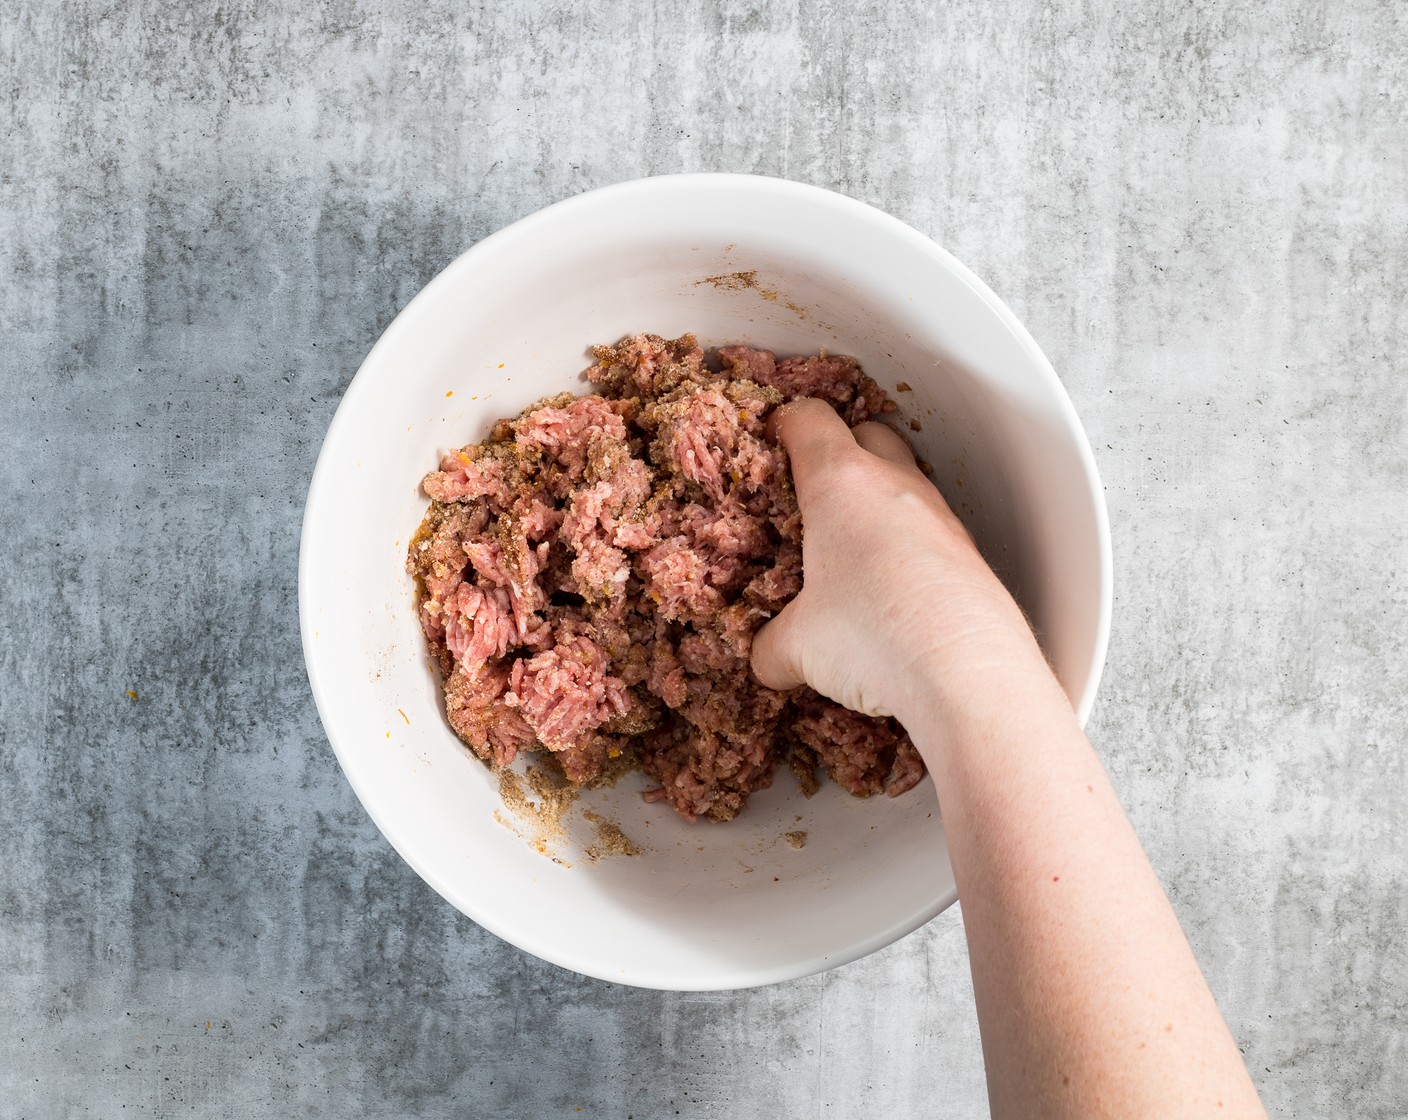 step 2 Make the meatballs. In a large bowl, mix Ground Pork (1 lb), Breadcrumbs (1/2 cup), Egg (1), Milk (2 Tbsp), McCormick® Garlic Powder (1 tsp), Mediterranean Spices (1 Tbsp), and Lemon (1). Combine well with your hands, then form the mixture into 20 meatballs; each meatball will be about a Tbsp of the mixture.